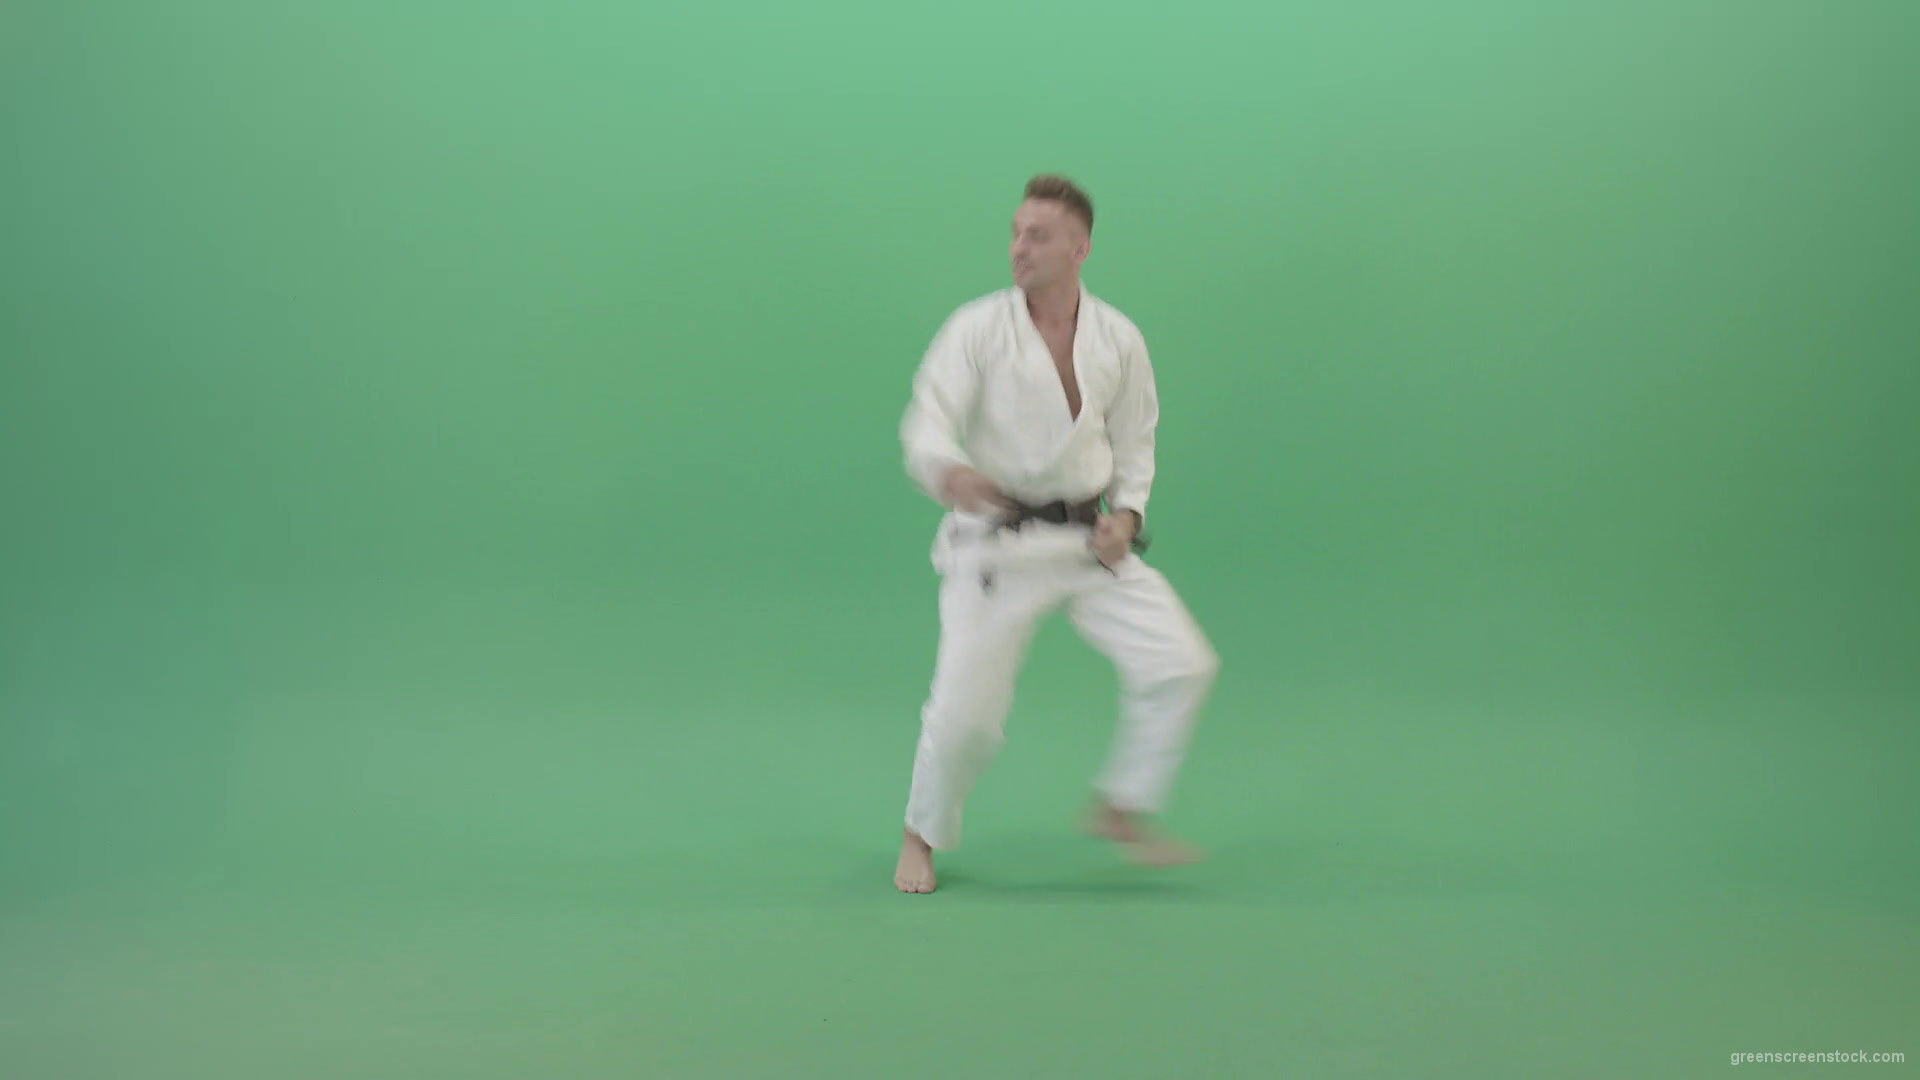 Super-Fighting-Combo-by-Jujutsu-man-in-side-view-isolated-on-green-screen-4K-Video-Footage-1920_004 Green Screen Stock